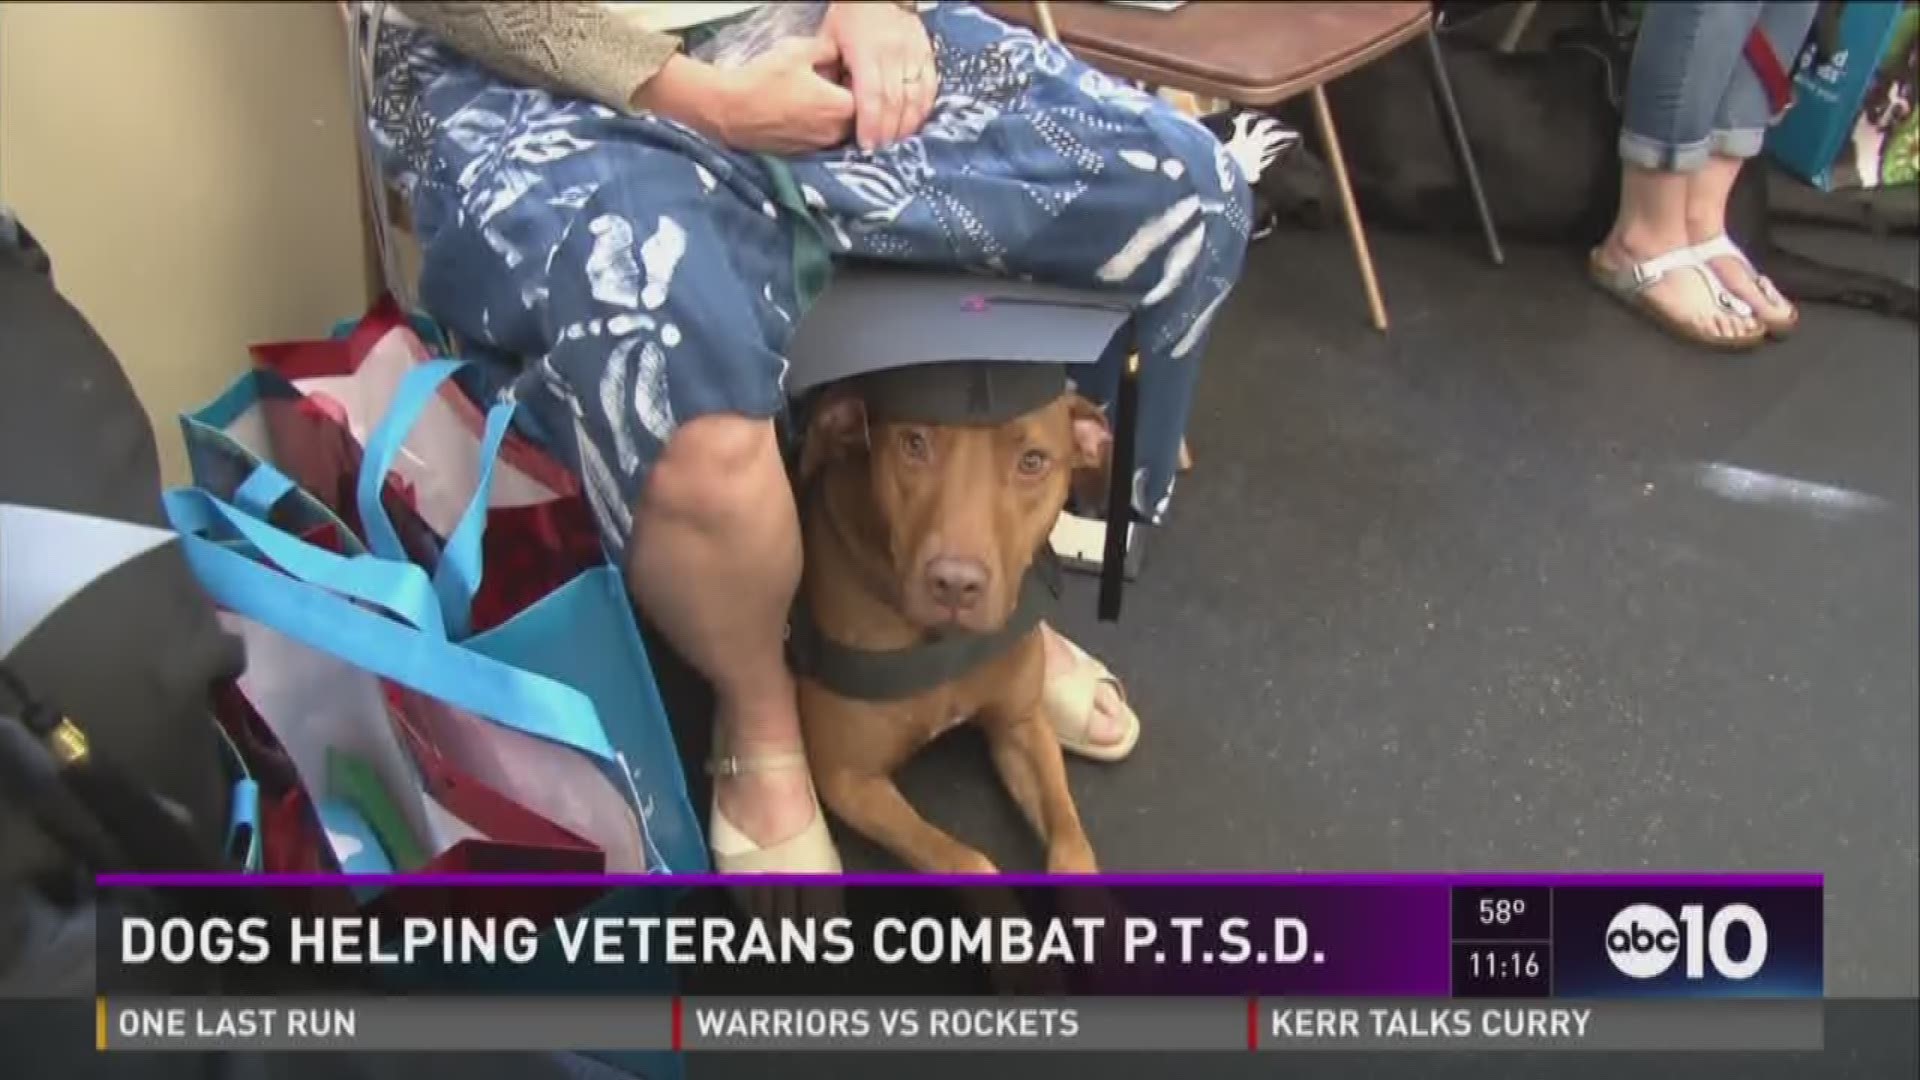 When trained right, these dogs can help veterans cope with PTSD after coming back to civilian life (April 24, 2016)